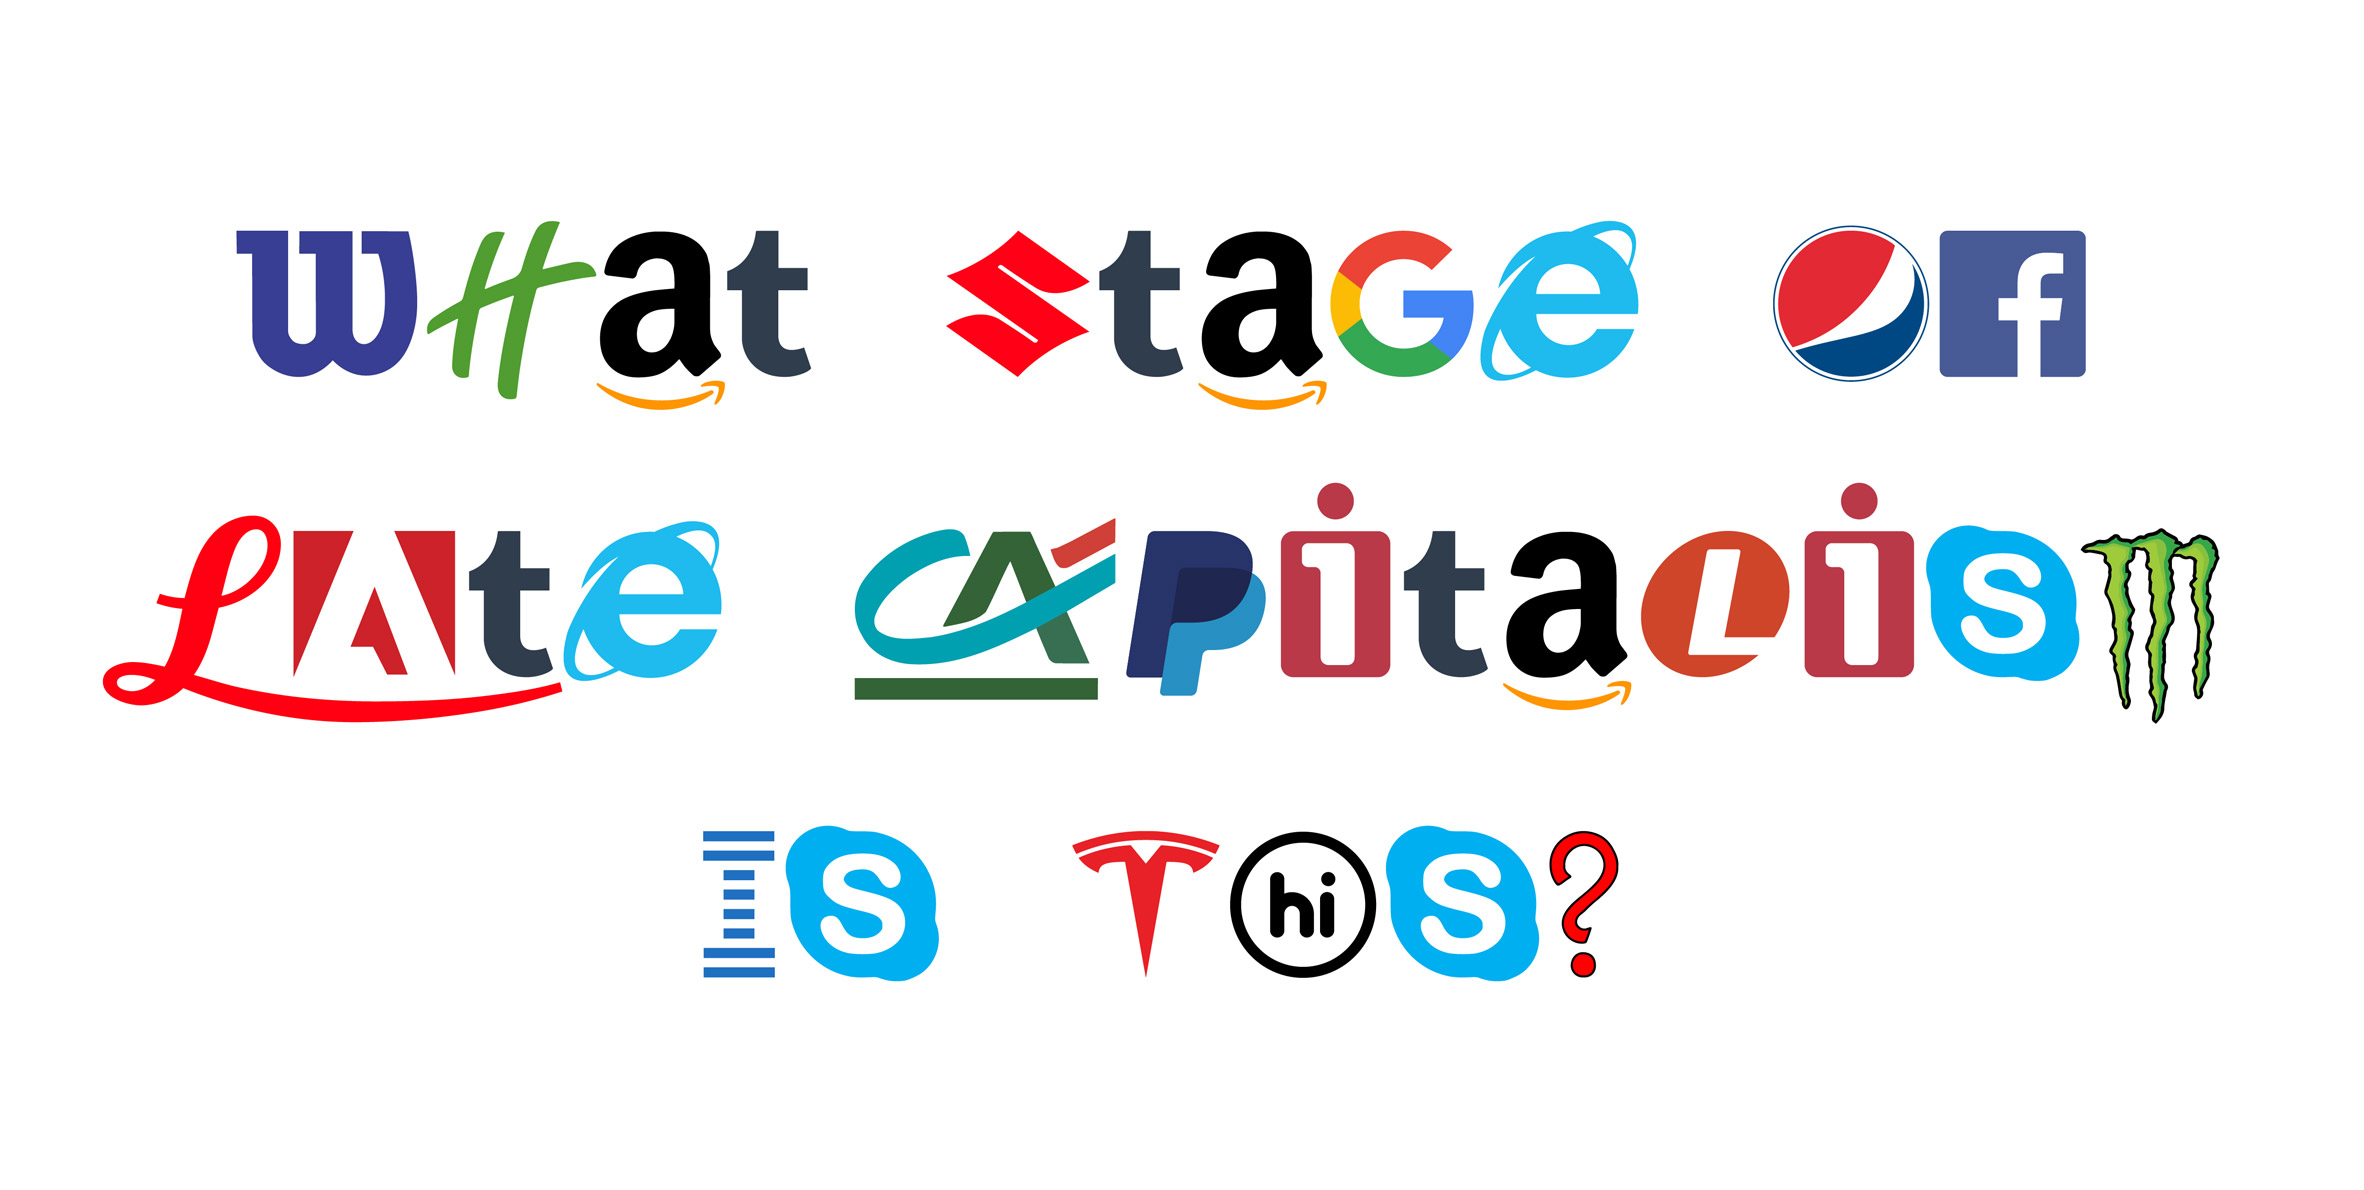 Brand New Roman is a typeface made from brand logos